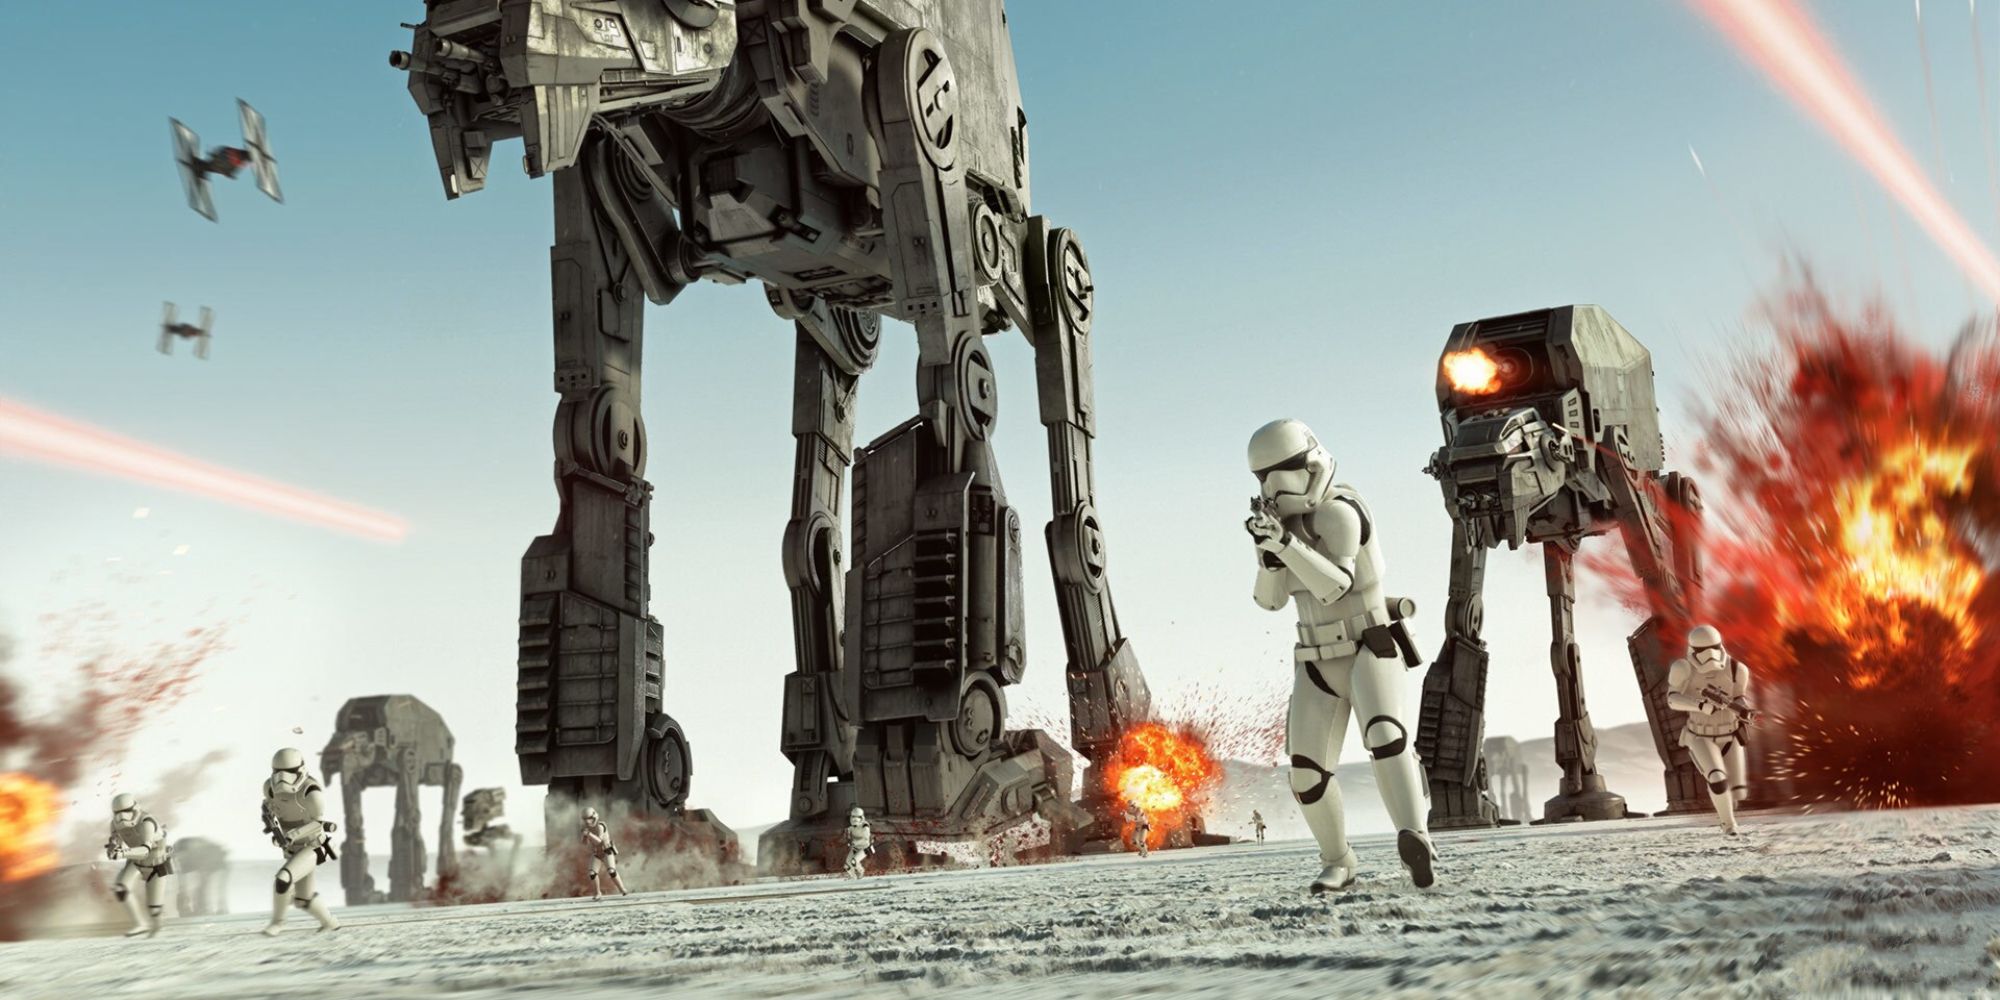 Dice Reportedly Shelving Star Wars Battlefront Series To Focus on Battlefield 2042